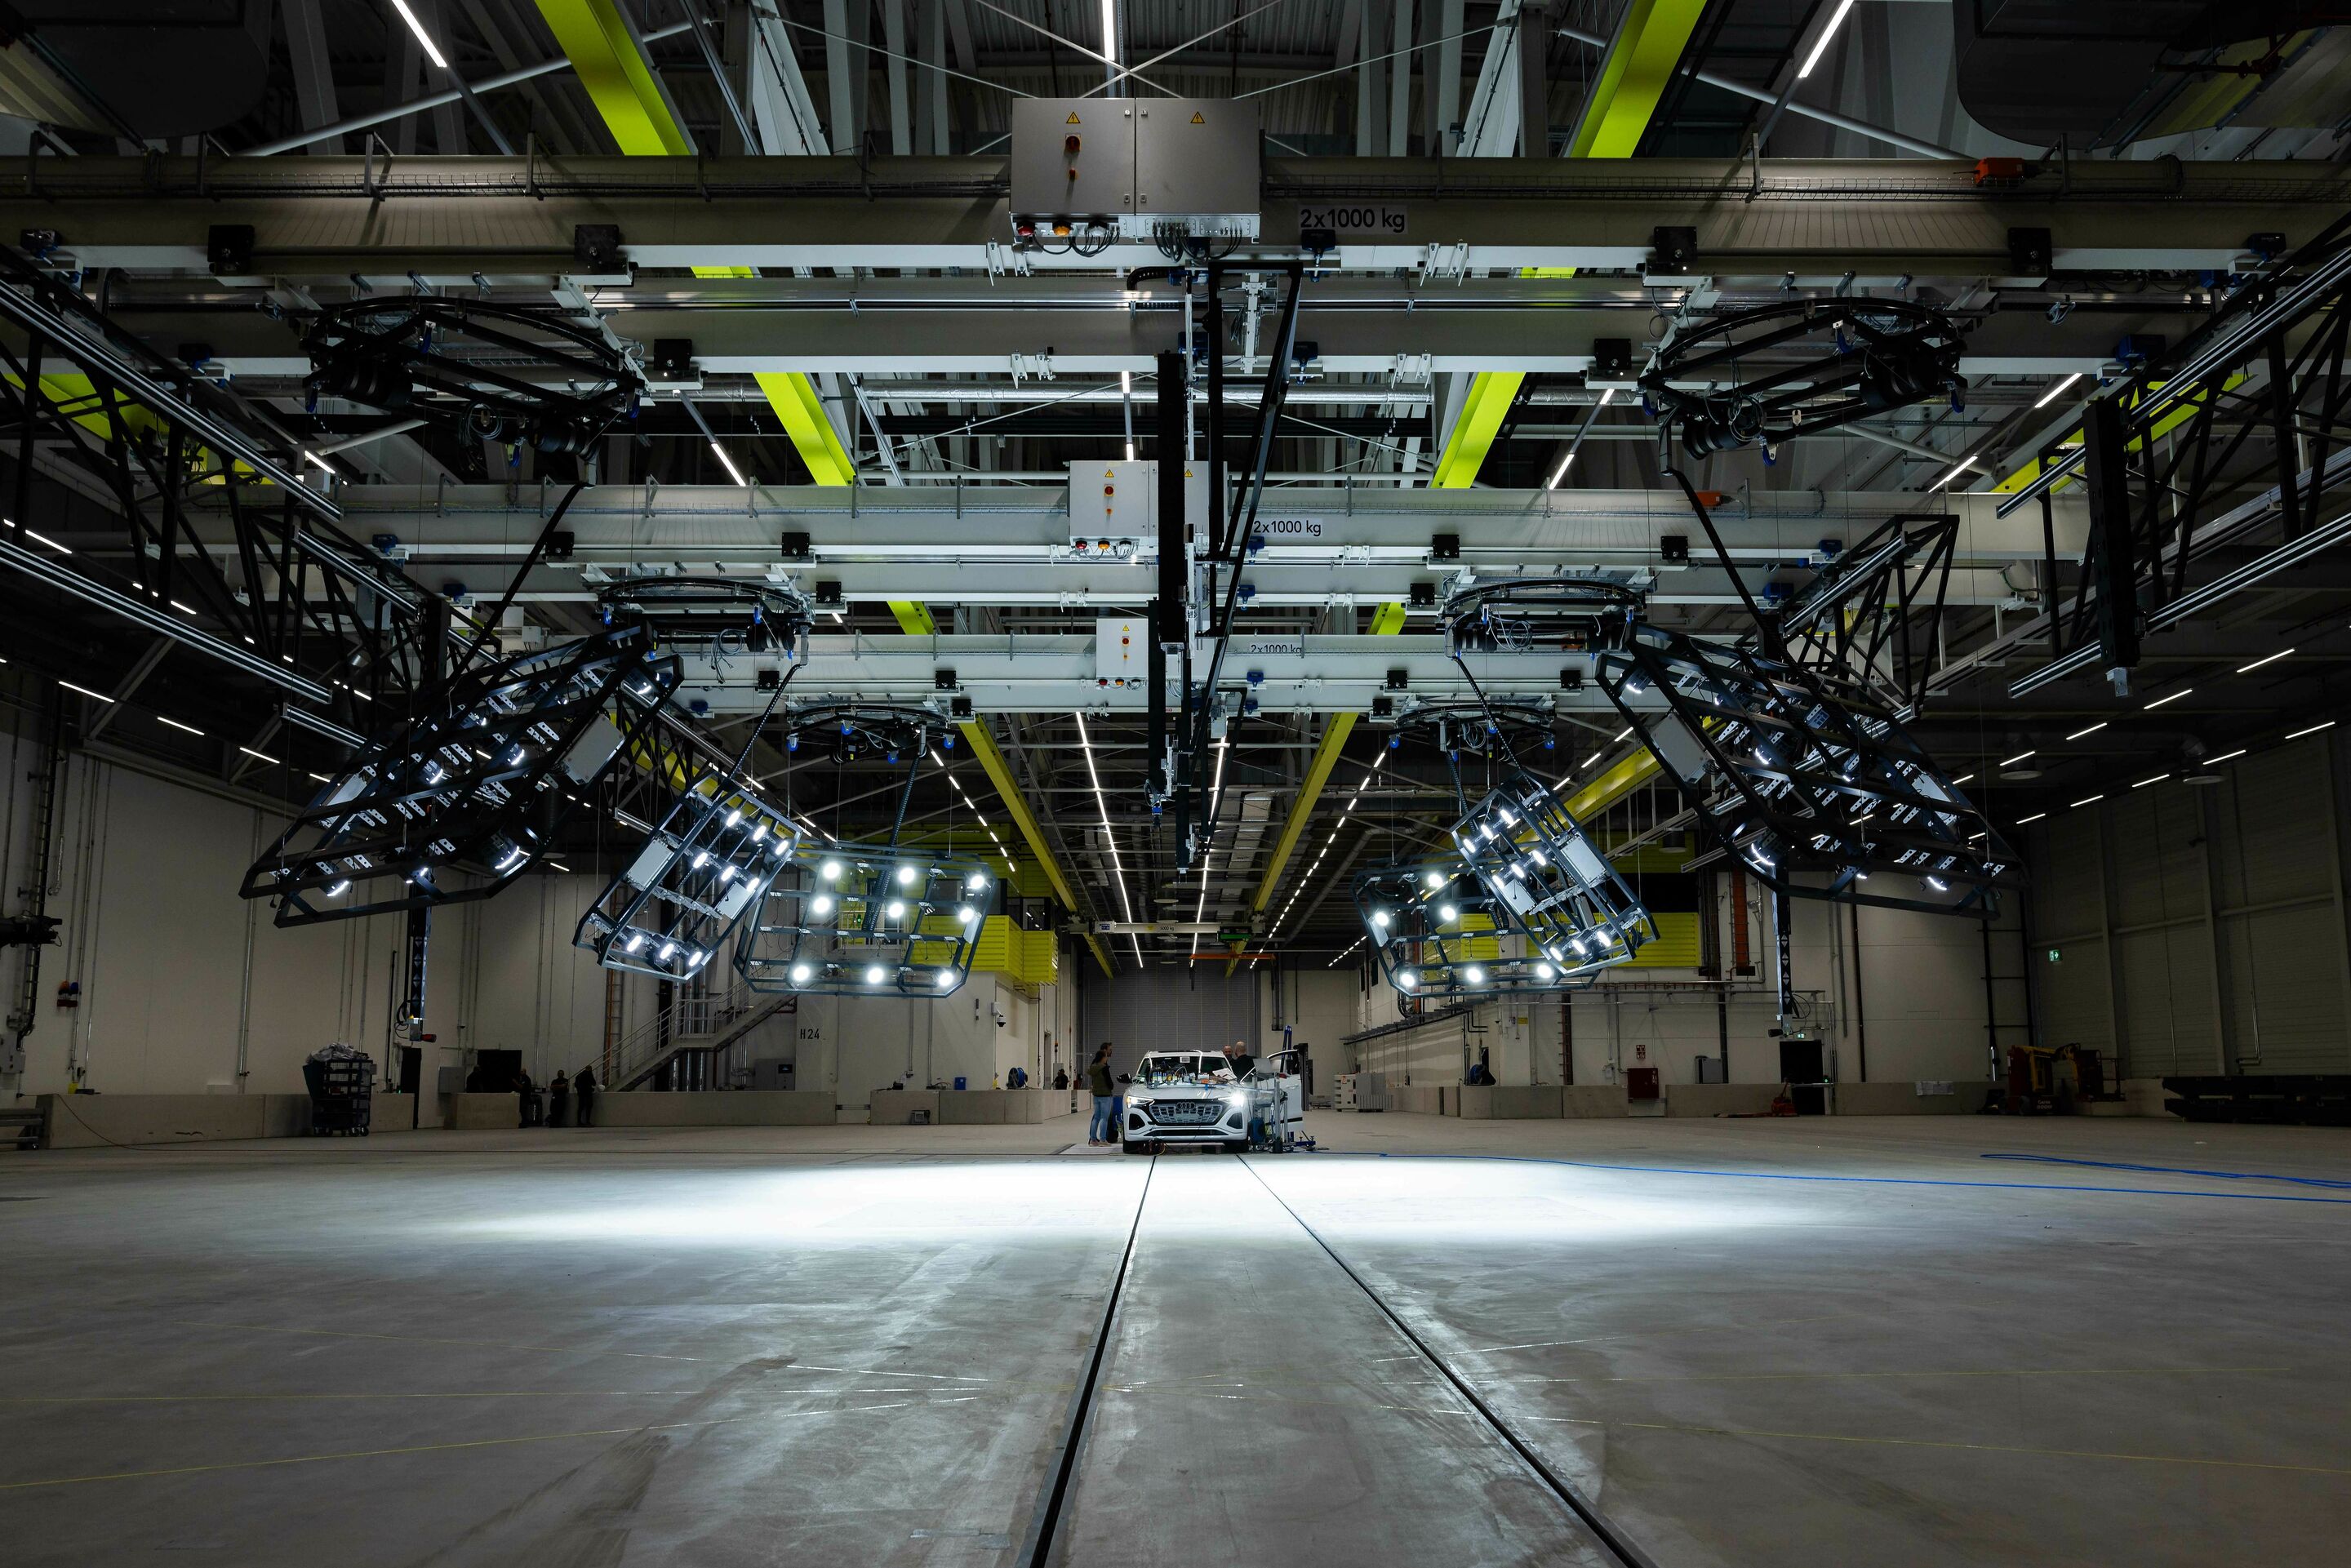 Five Stars: The New Audi A6 in the Euro NCAP